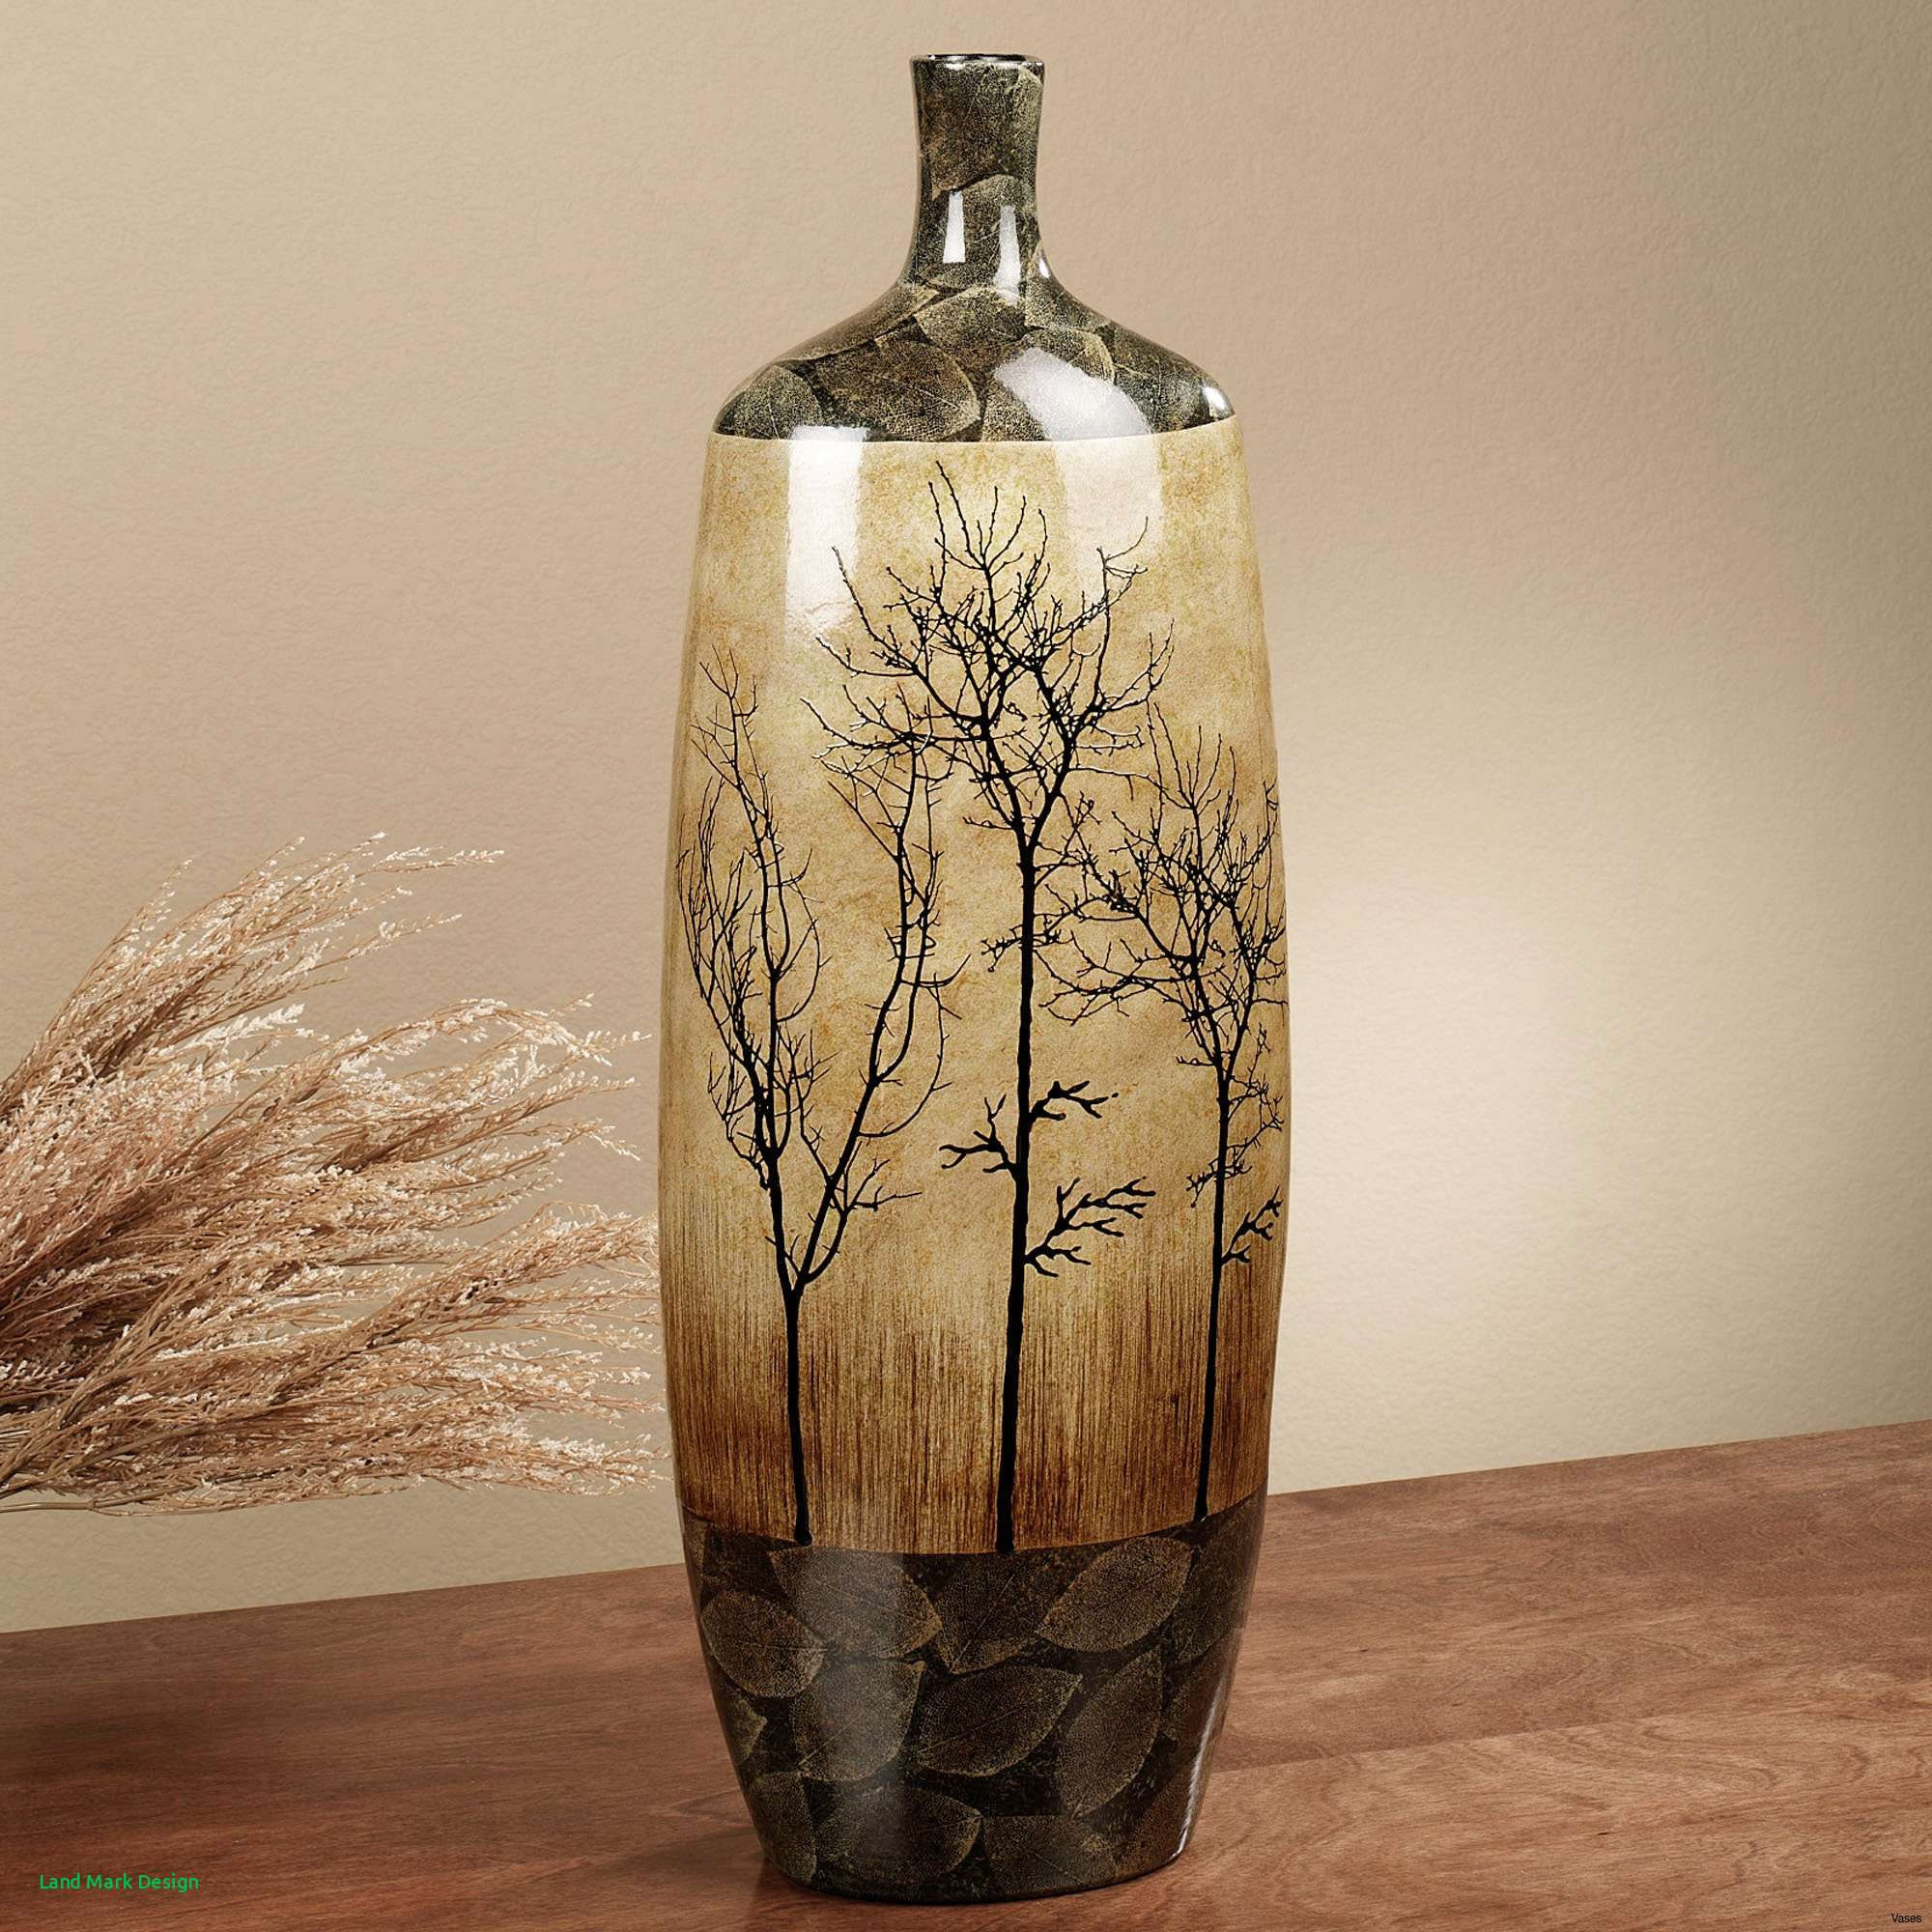 24 Popular Brown Glass Vases wholesale 2024 free download brown glass vases wholesale of large glass vase stock l h vases 12 inch hurricane clear glass vase in large glass vase images big vase of large glass vase stock l h vases 12 inch hurricane